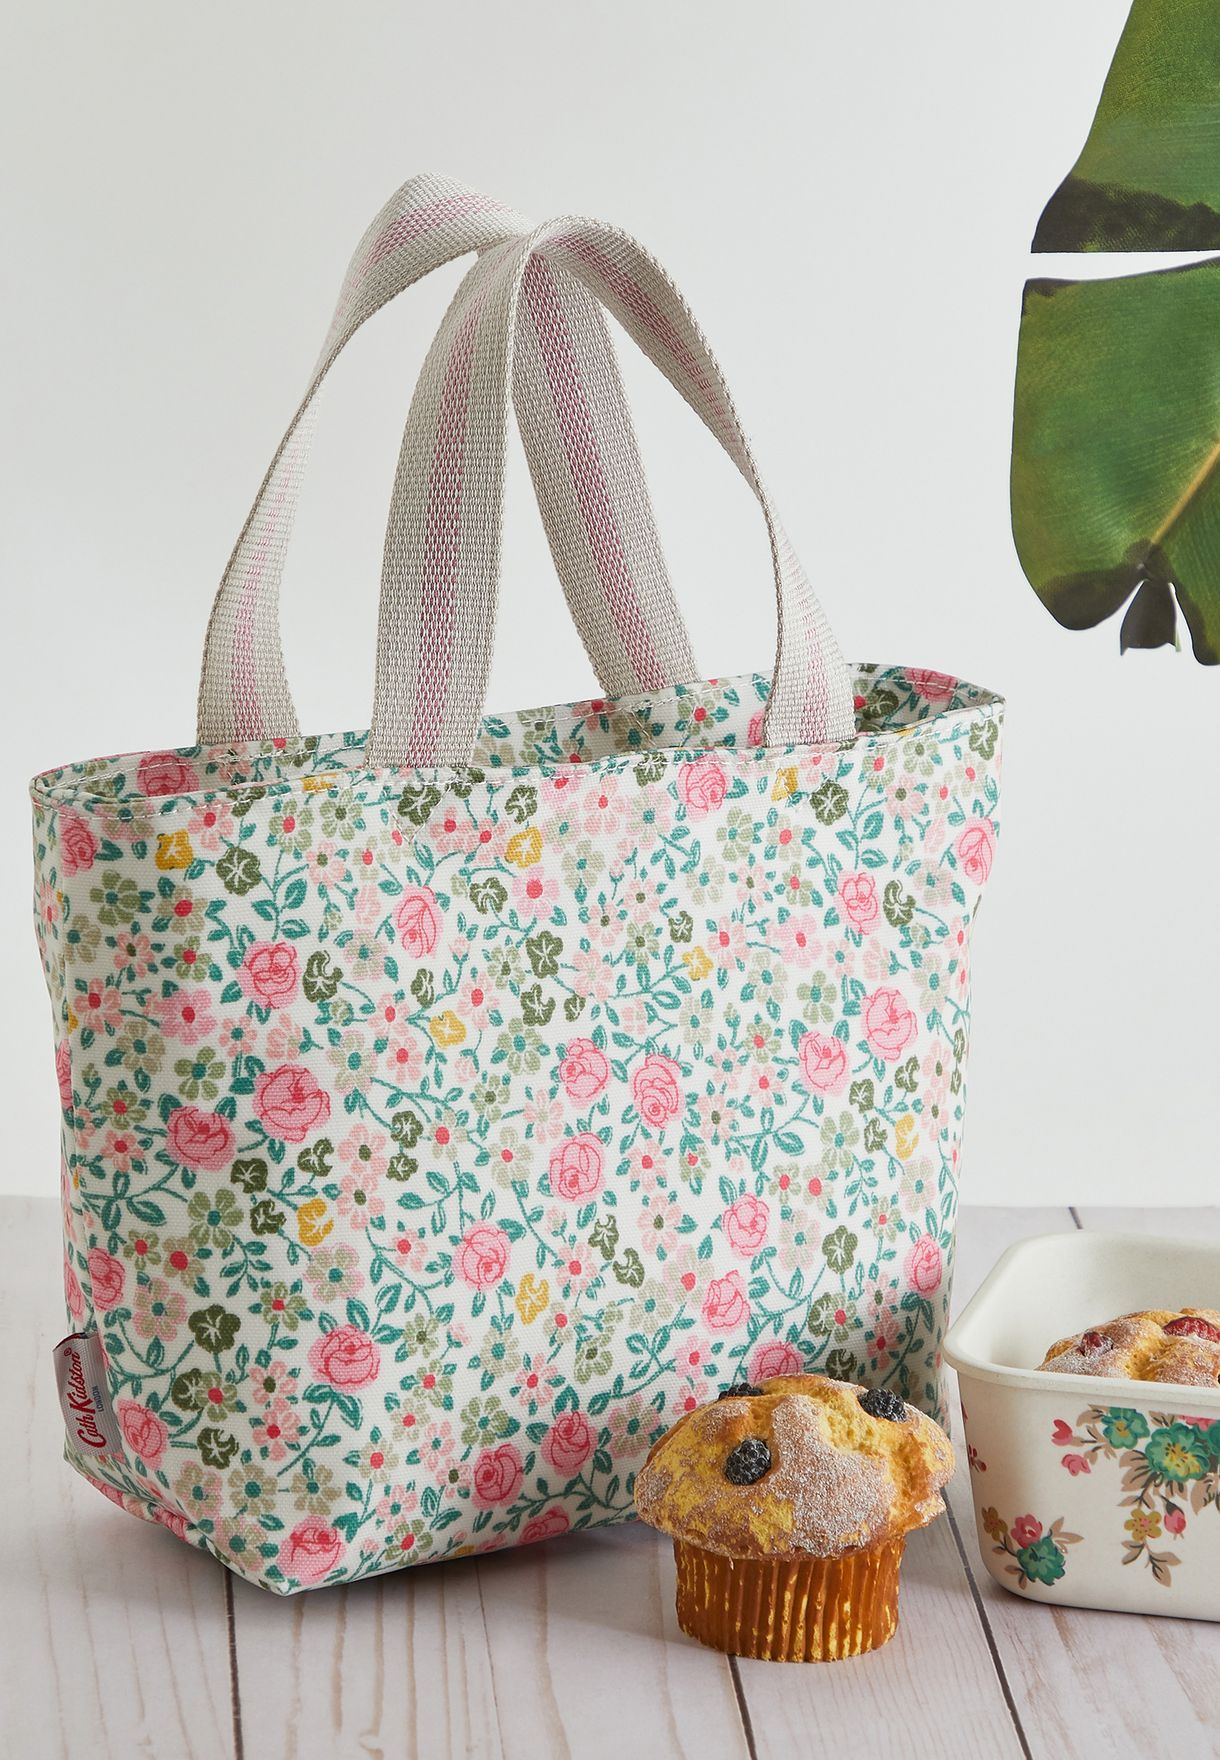 cath kidston lunch tote bag